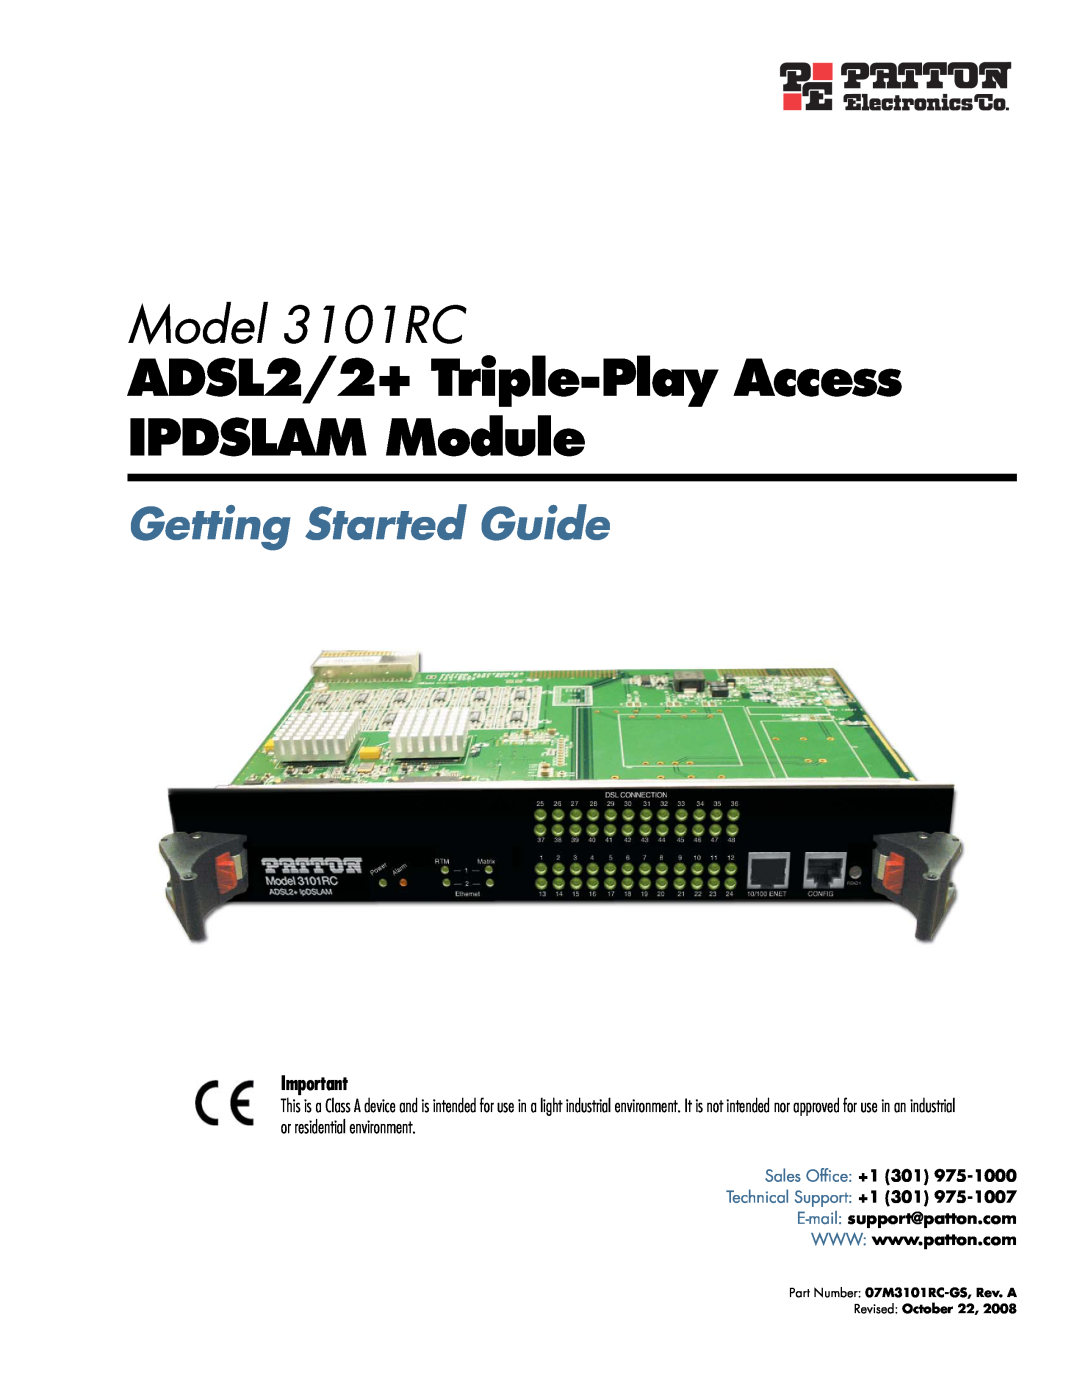 Patton electronic Model 3101RC manual ADSL2/2+ Triple-Play Access IPDSLAM Module, Getting Started Guide 